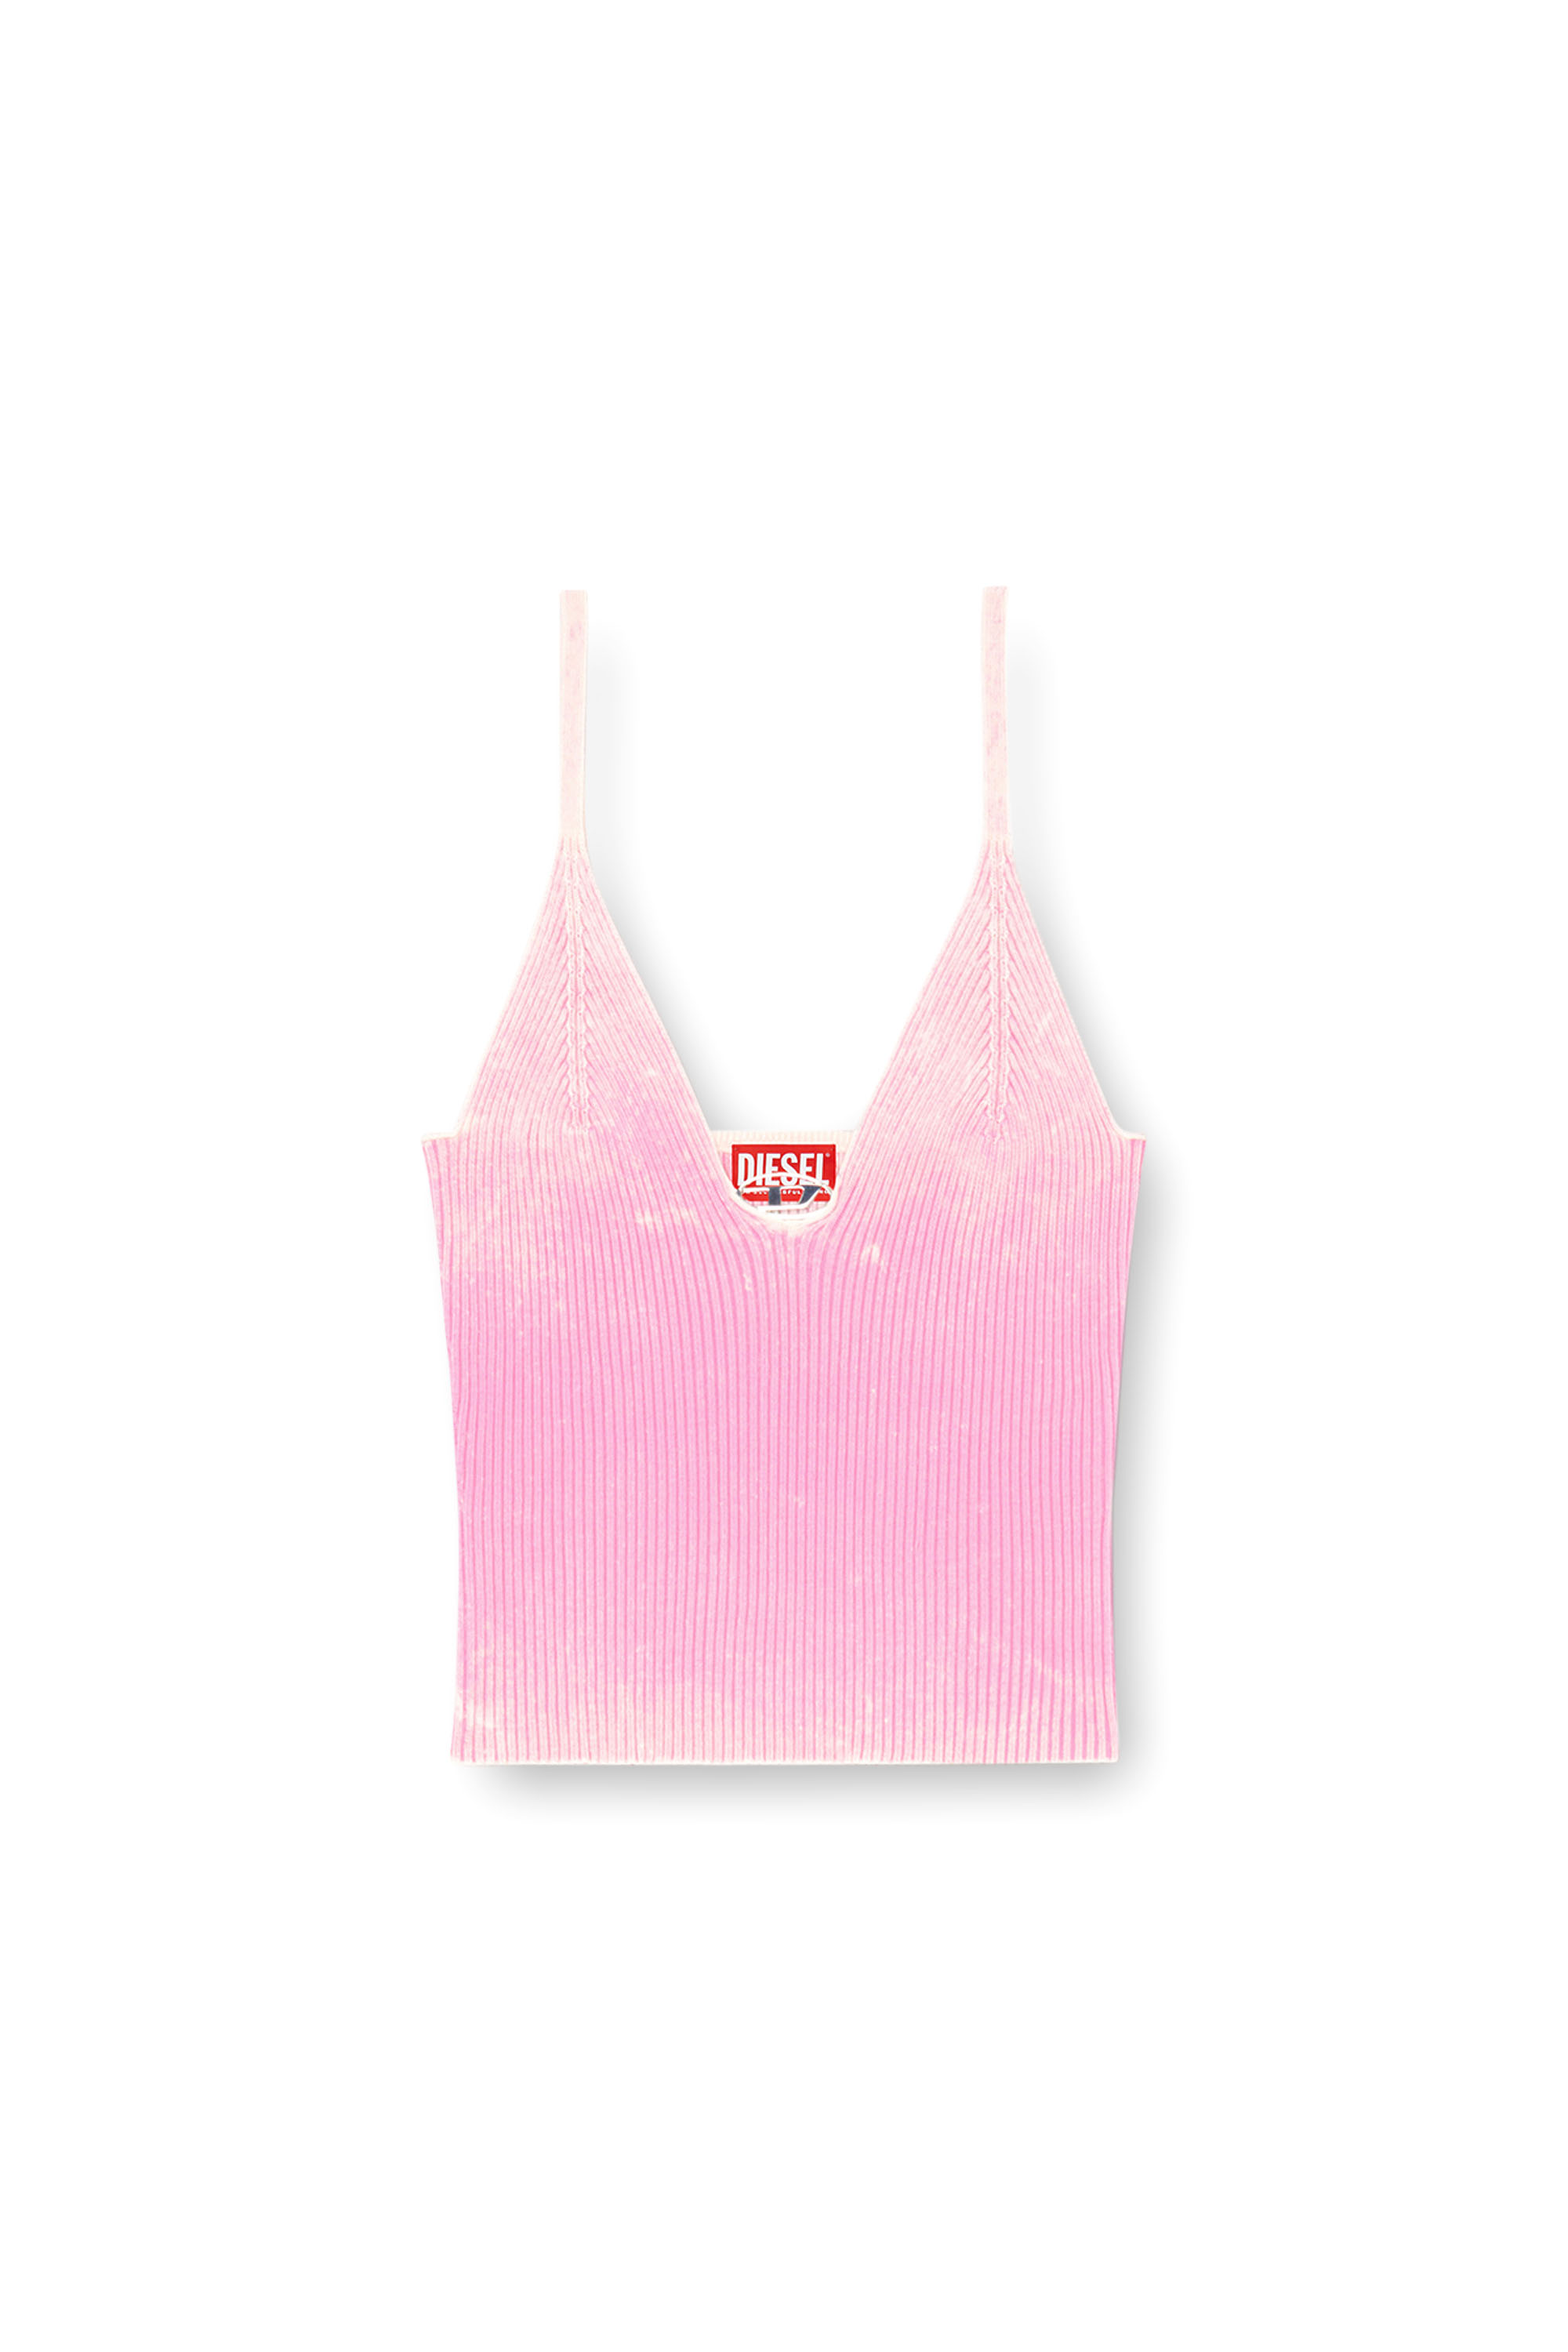 Diesel - M-LAILA, Female Camisole in faded ribbed knit in ピンク - Image 3